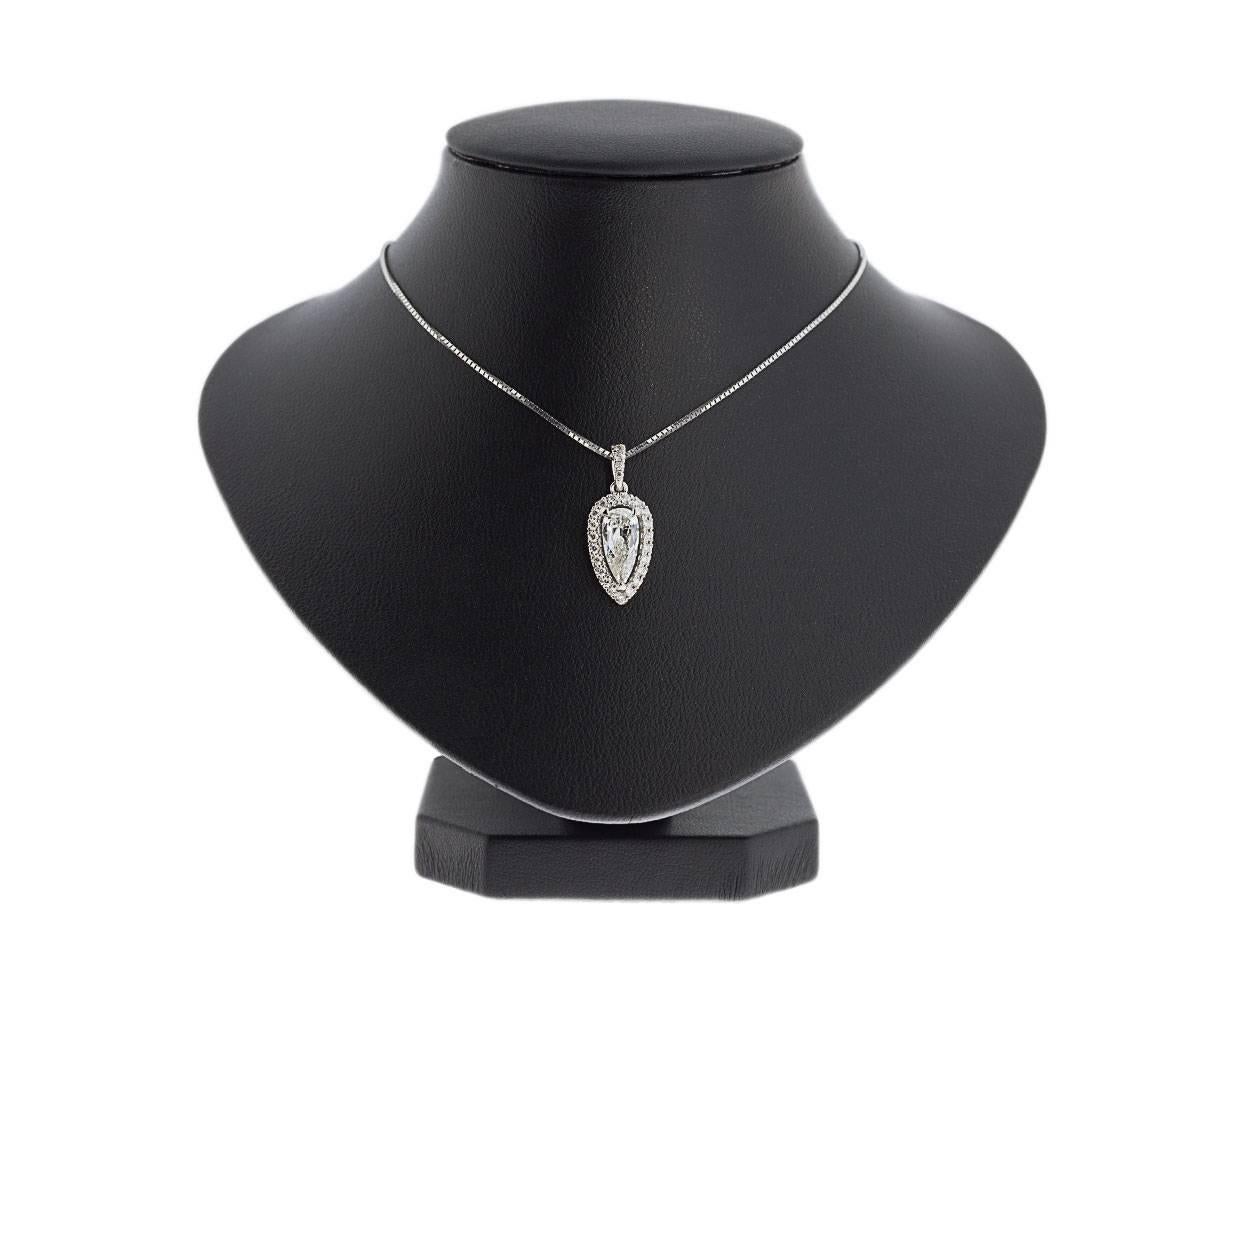 Simple yet elegant & beautiful would be the best way to describe this stunning necklace! It features a 1.05 carat, elongated pear brilliant cut, natural diamond that is prong set. This pendant was custom made for this diamond, featuring .28